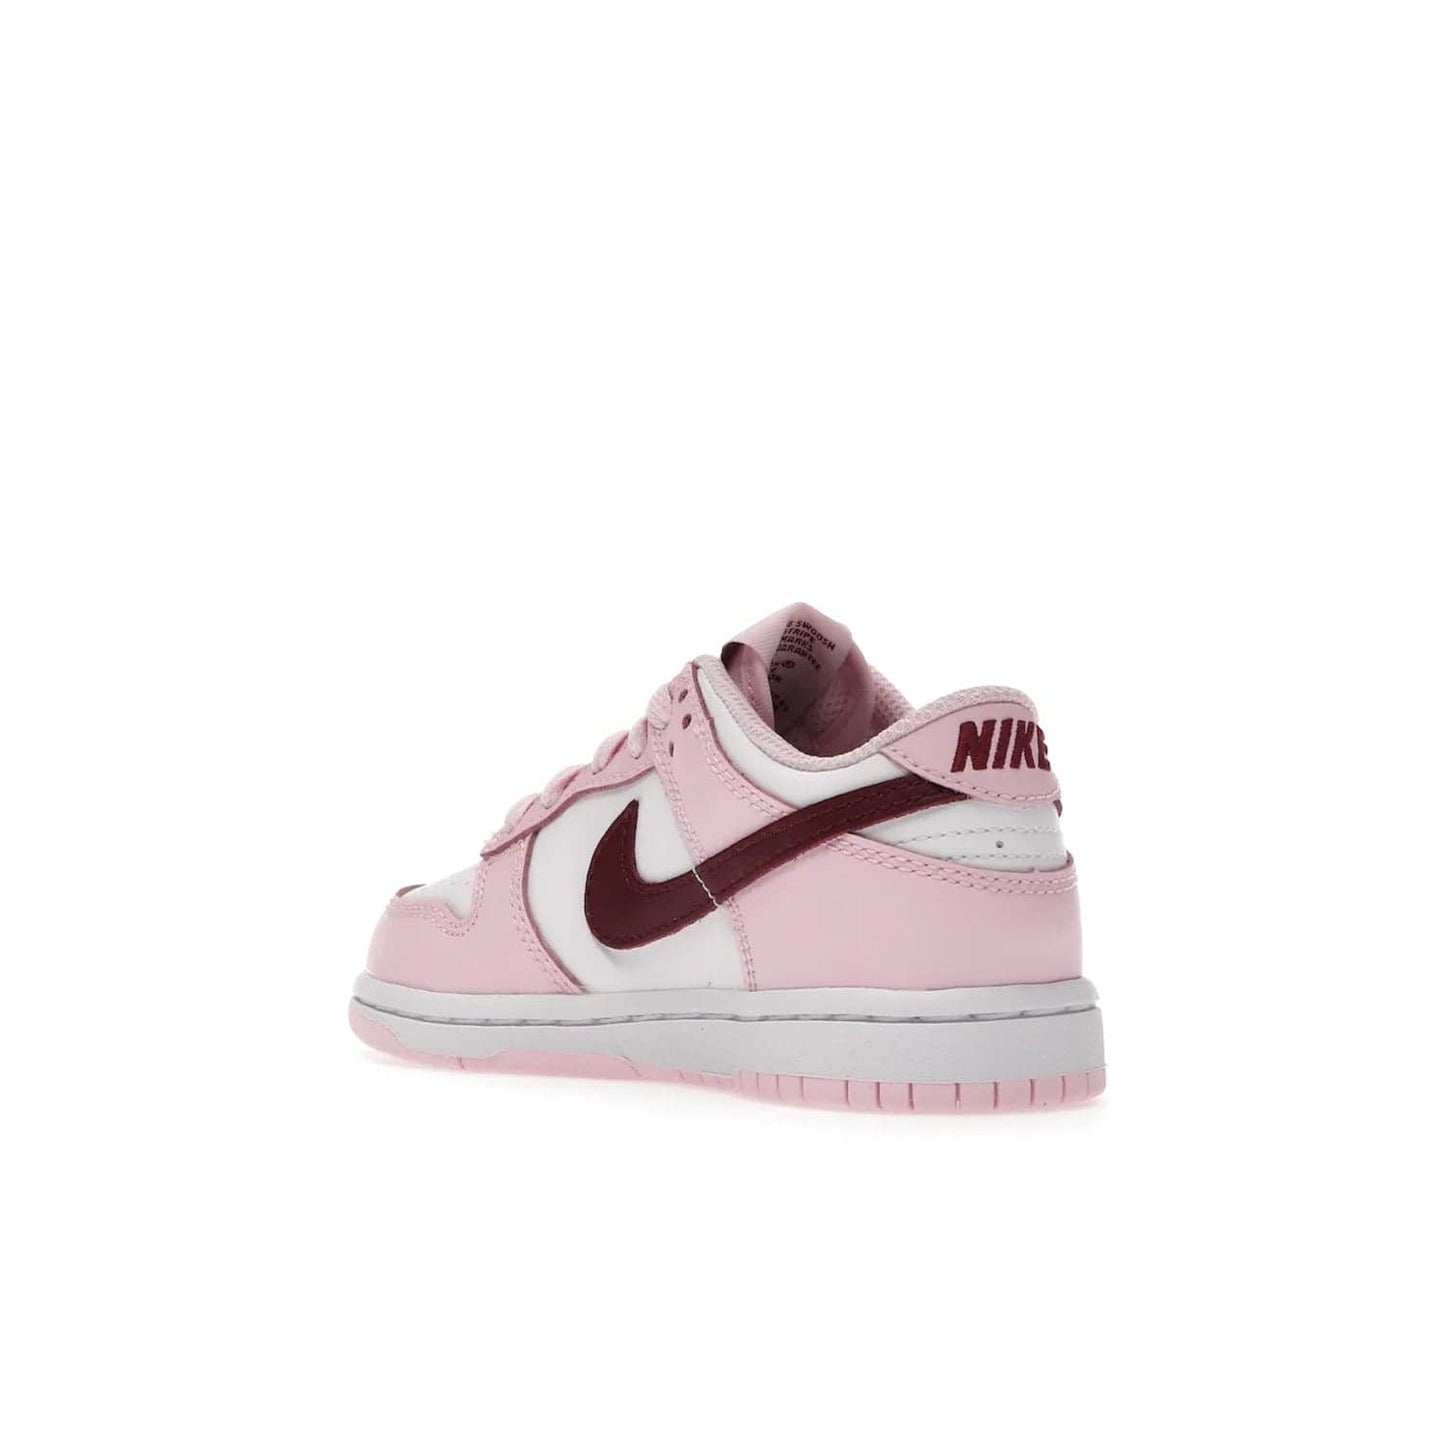 Nike Dunk Low Pink Red White (PS) - Image 24 - Only at www.BallersClubKickz.com - Introducing the Nike Dunk Low Pink Red White (PS), the perfect addition to your sneaker collection. A classic silhouette with modern vibrant colors, including a pink upper with red and white accents and a white midsole. Comfort and durability, perfect for any outfit. Limited edition, available June 22nd.